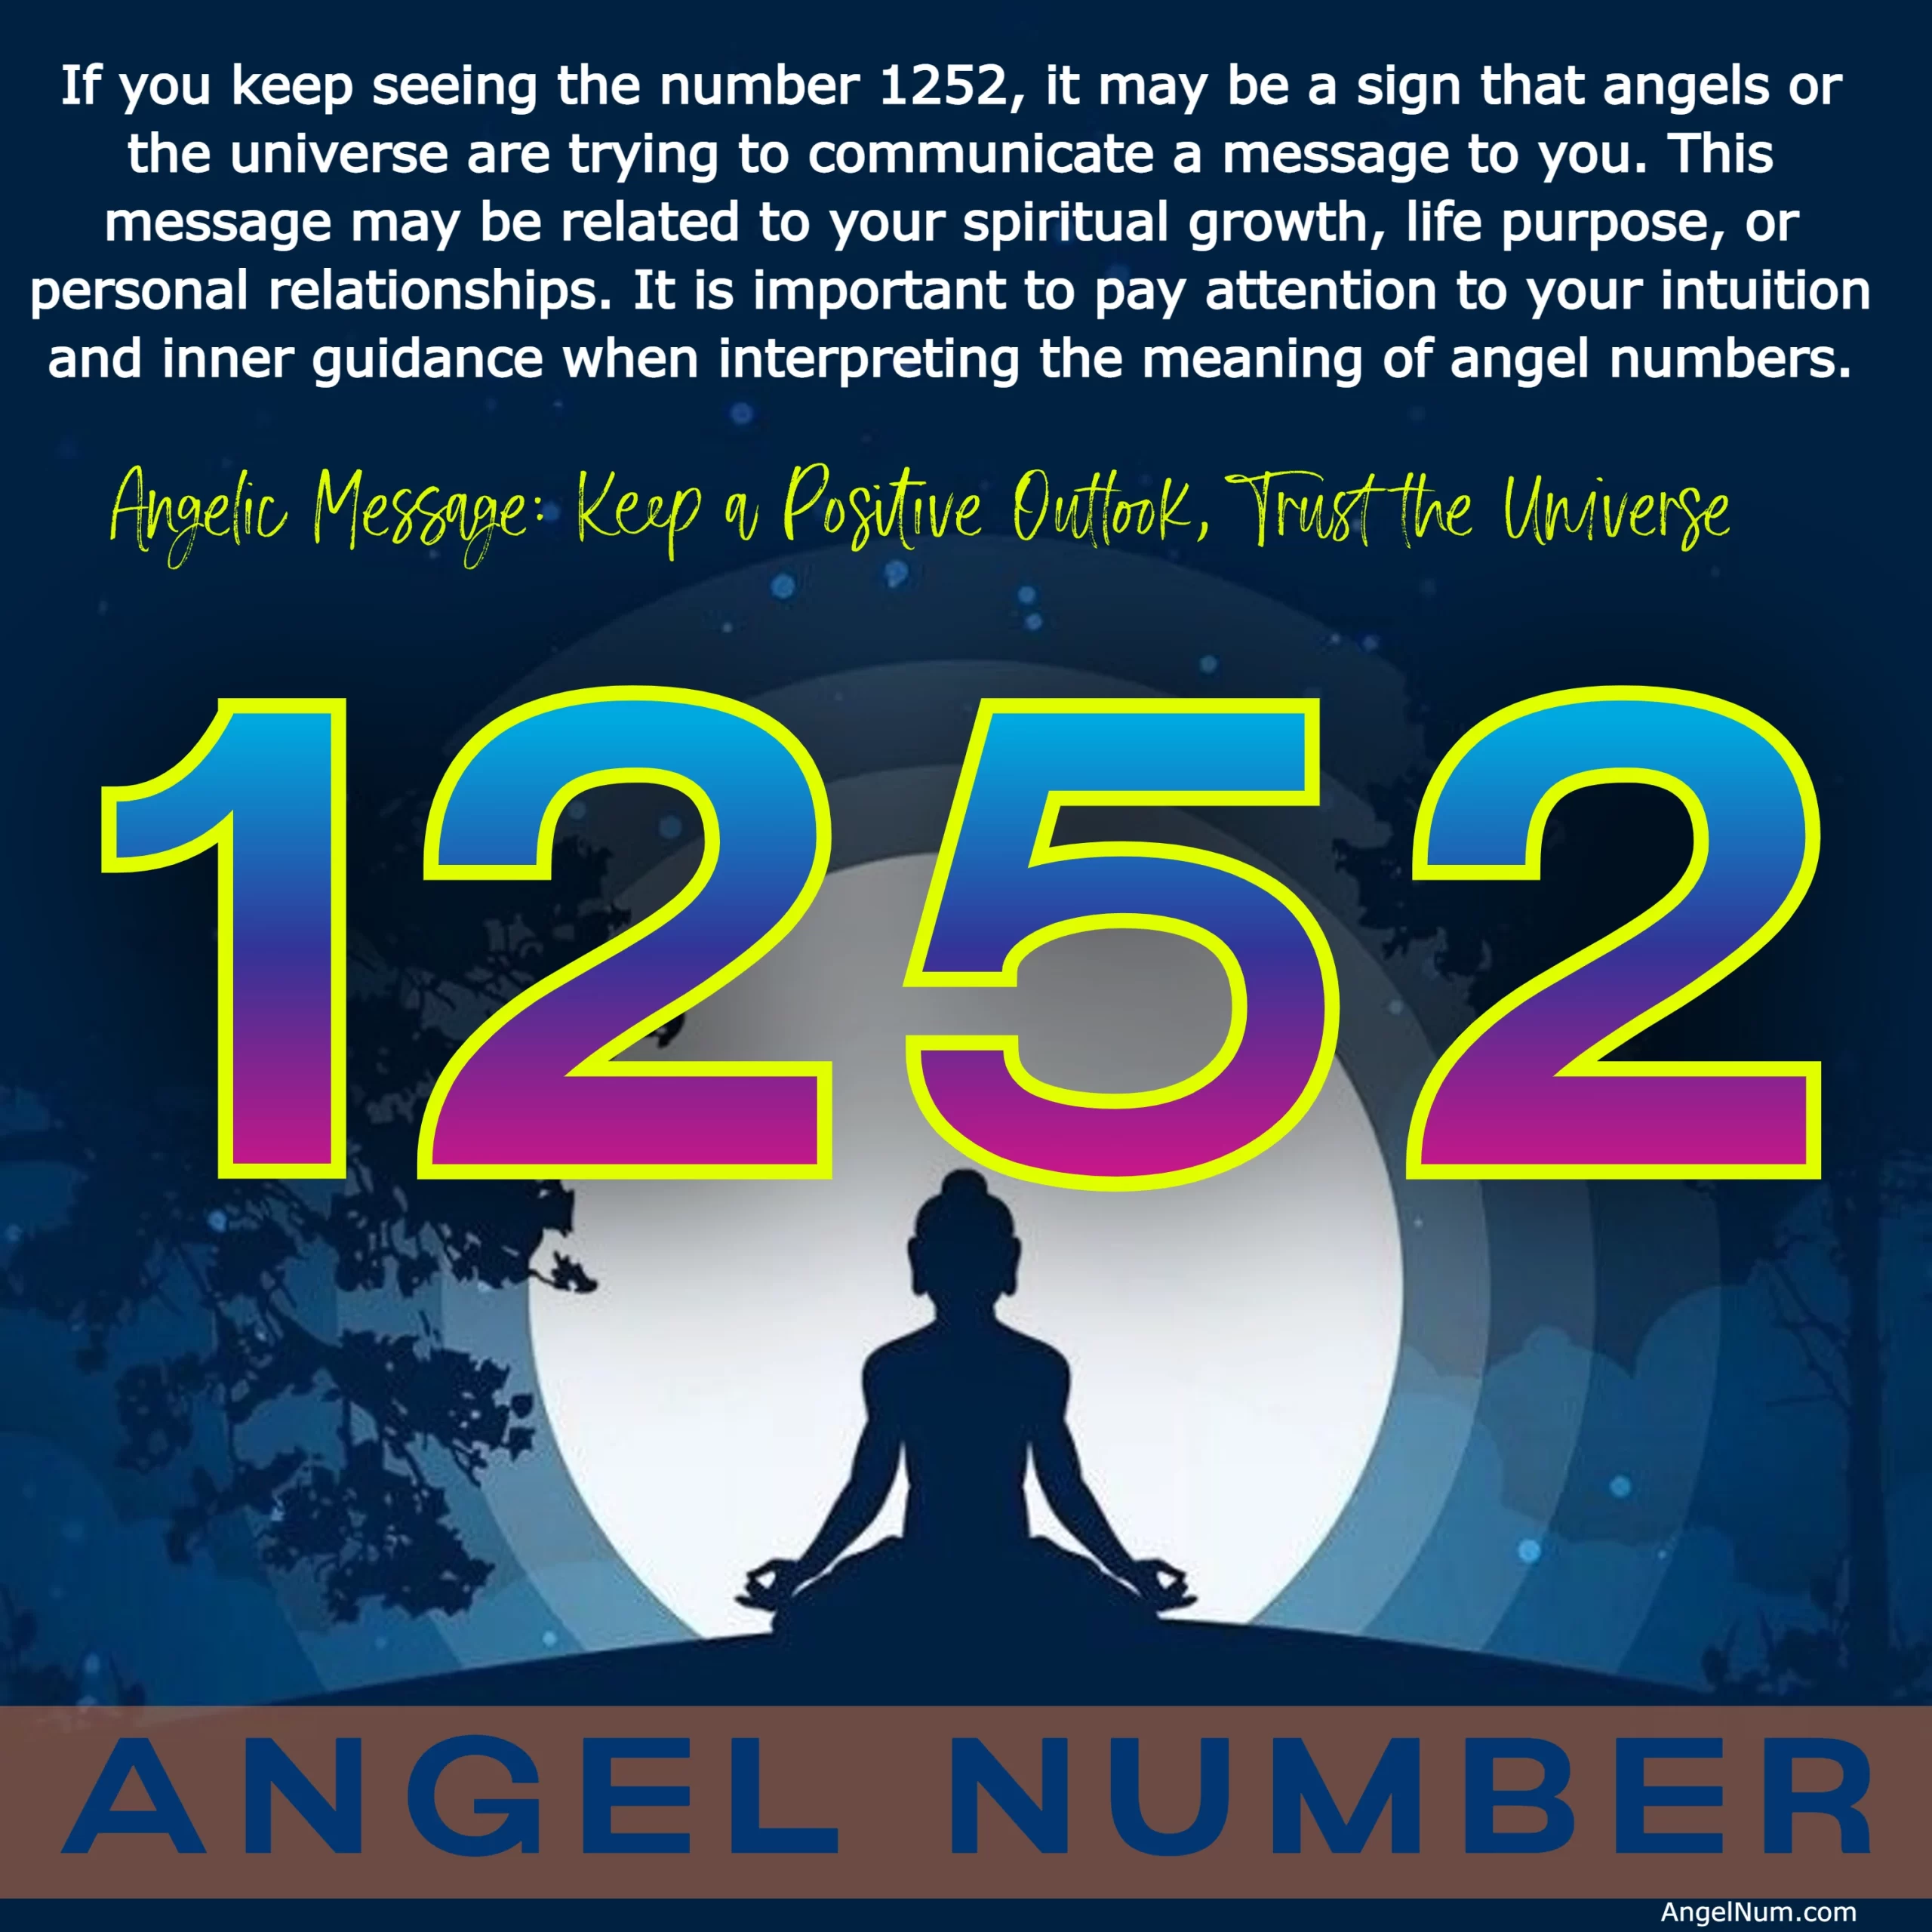 Angel Number 1252: Meaning, Significance, and Interpretation